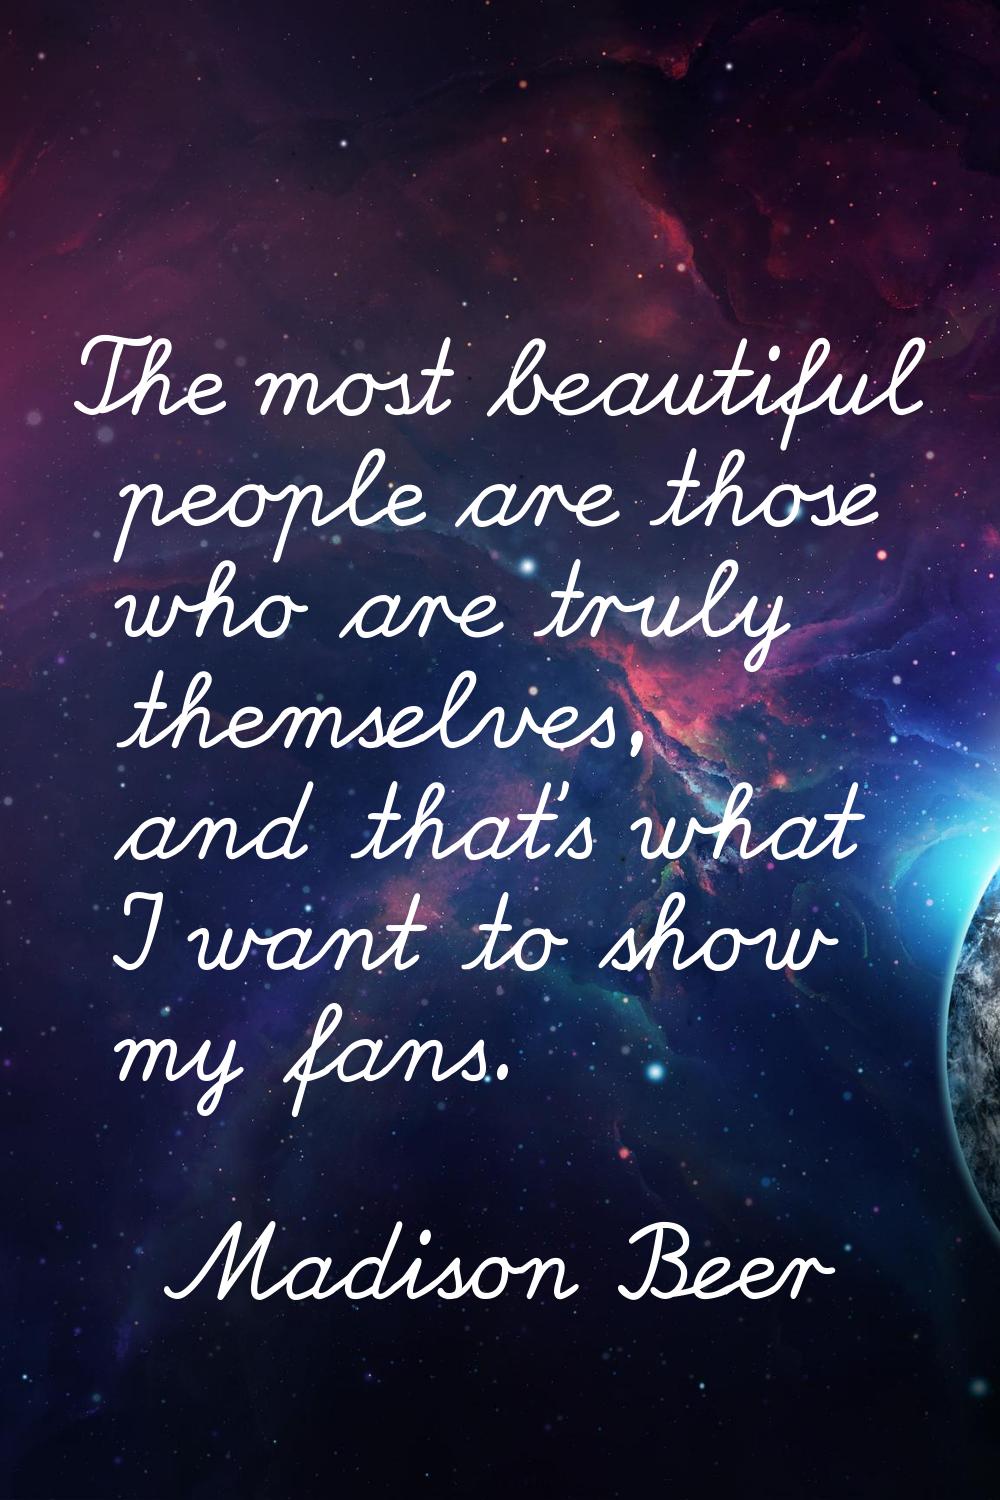 The most beautiful people are those who are truly themselves, and that's what I want to show my fan